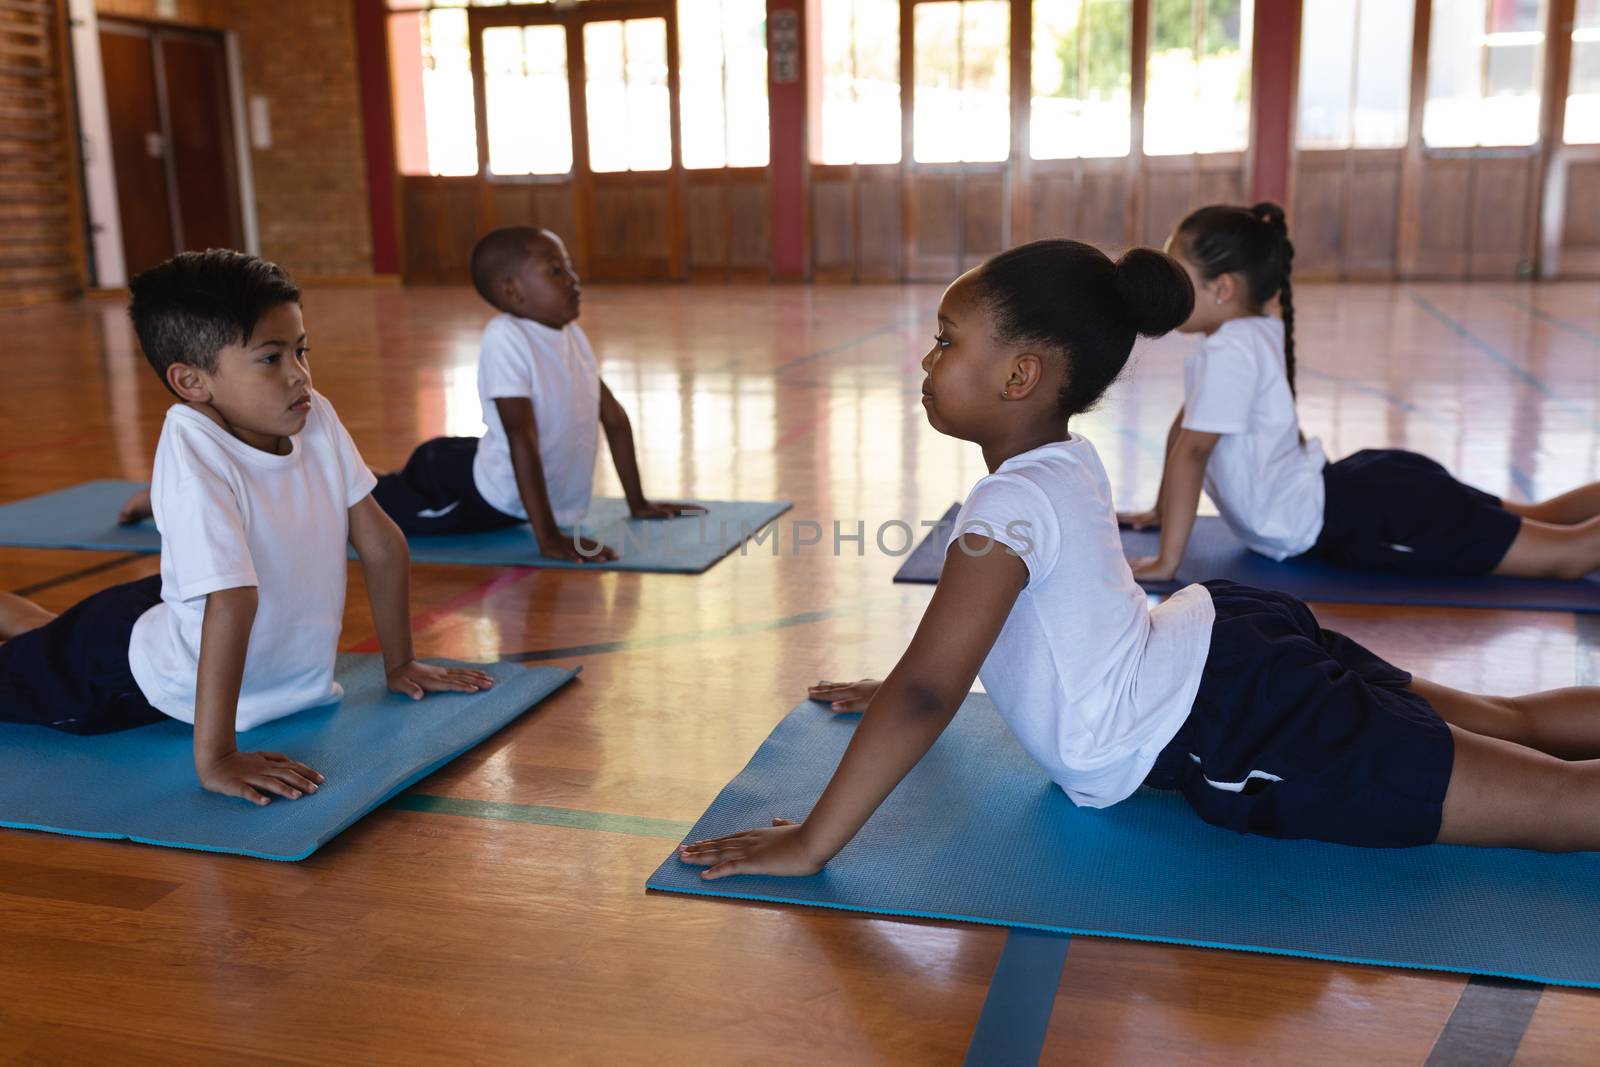 Side view of concentrate schoolkids doing yoga position on a yoga mat in school